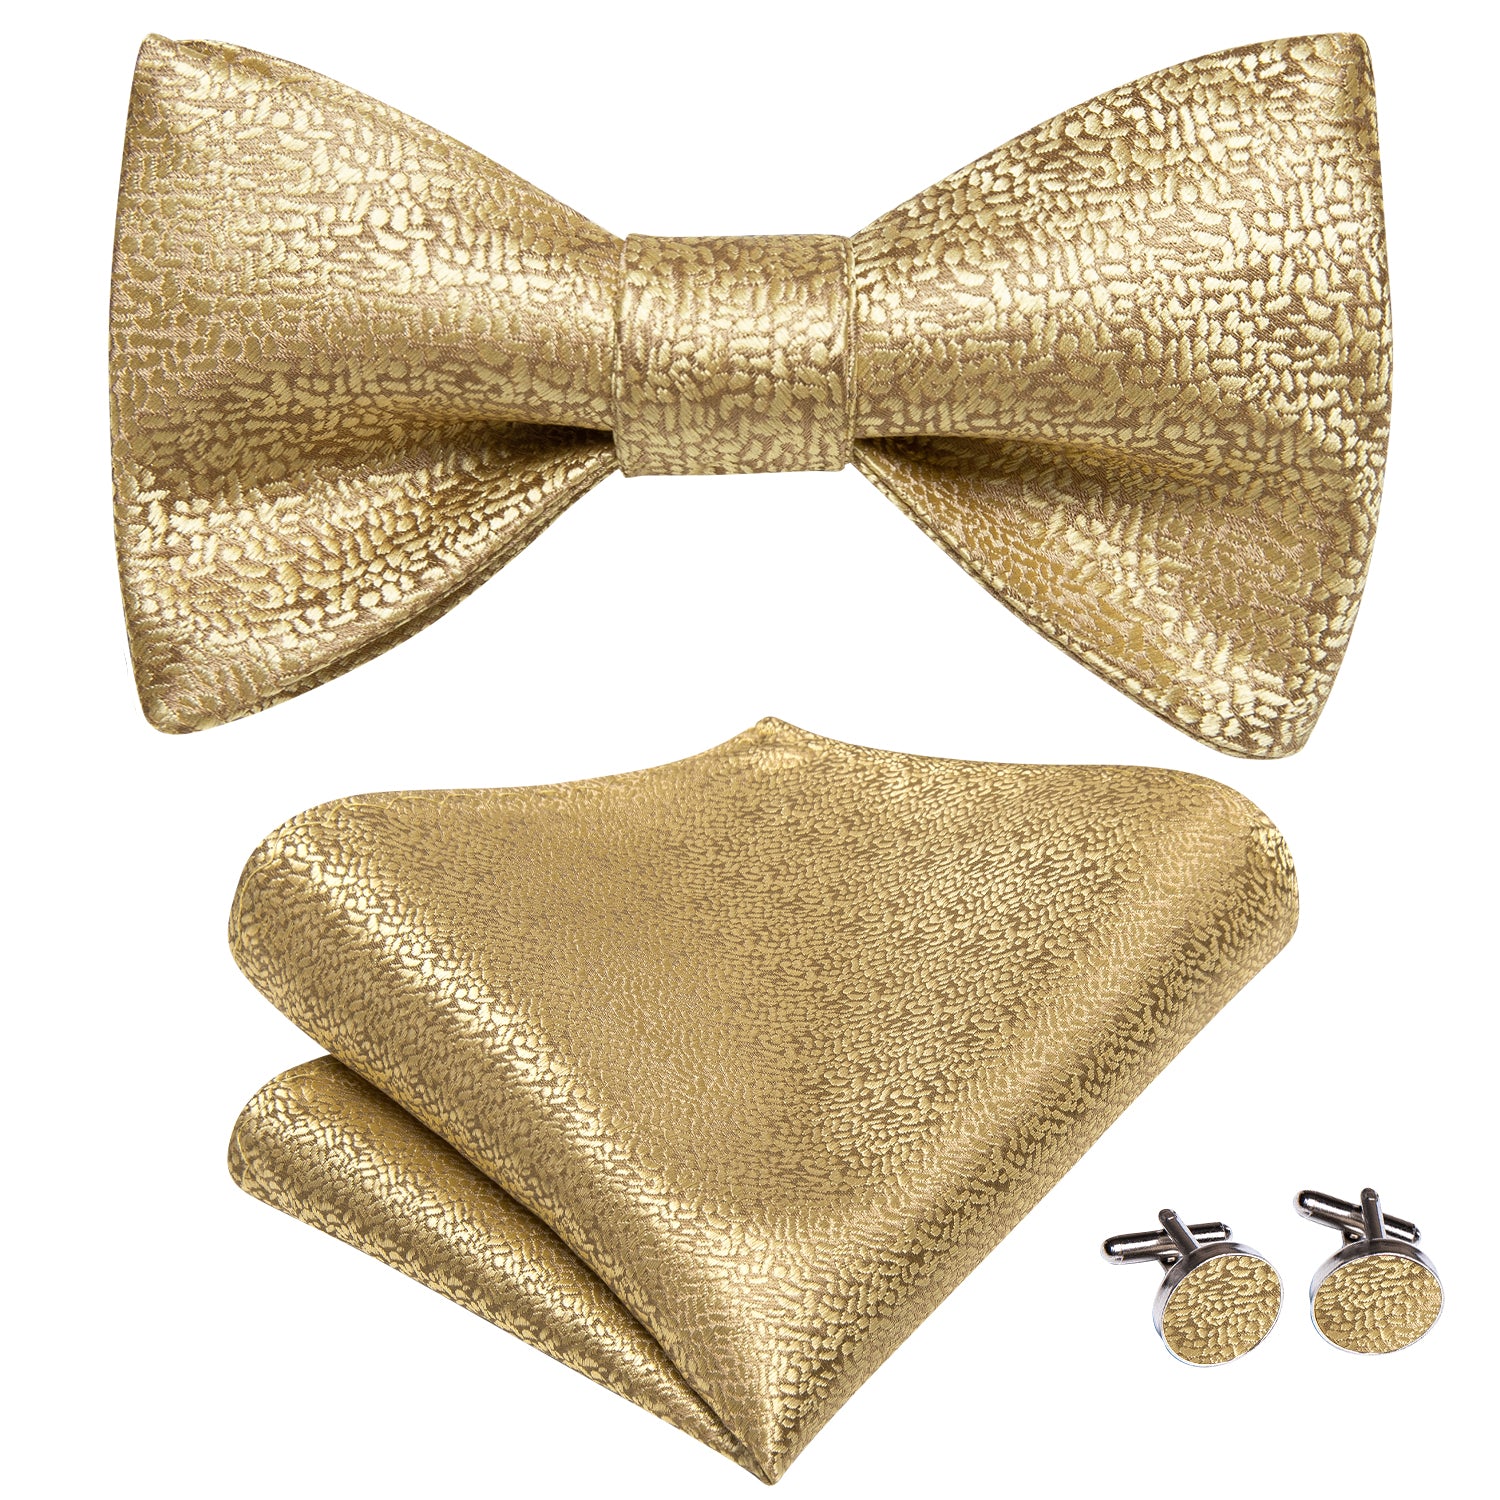 Champagne Golden Solid Self-tied Bow Tie Pocket Square Cufflinks Set